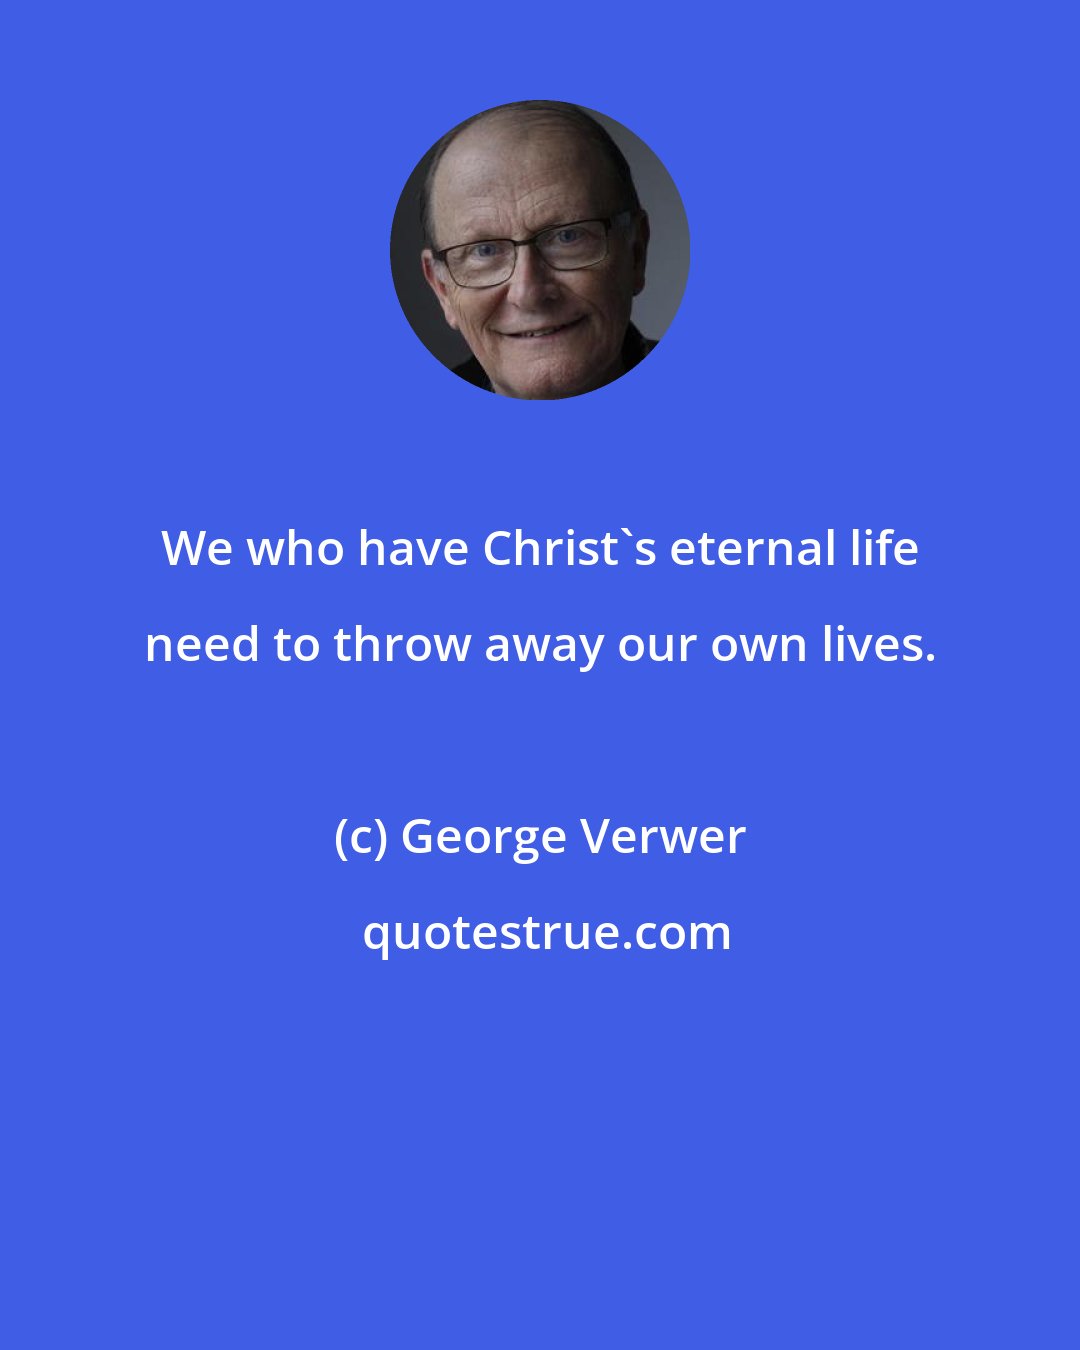 George Verwer: We who have Christ's eternal life need to throw away our own lives.